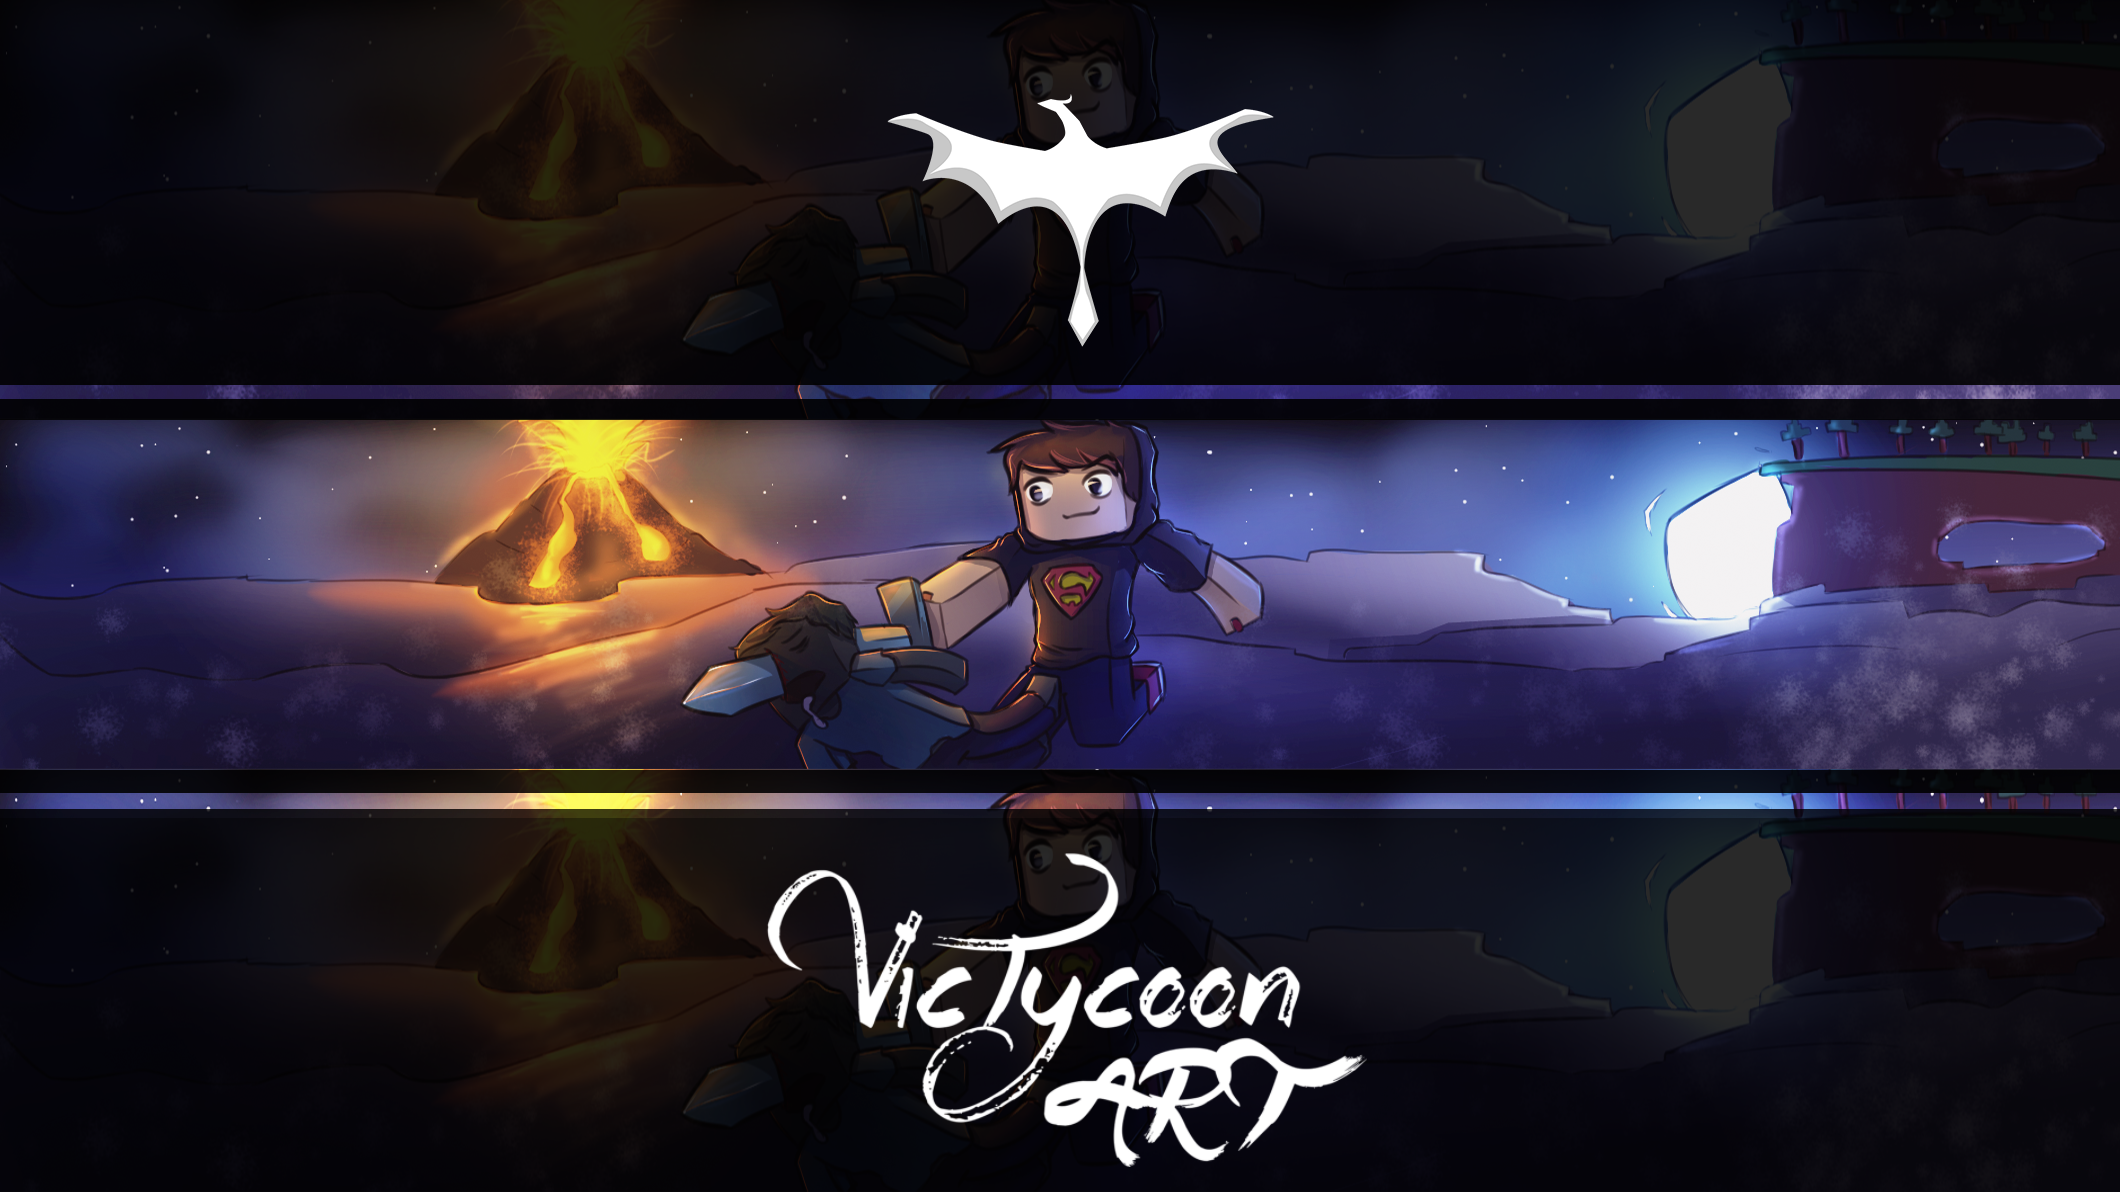 Youtube Banner for NerD_PlayBR by VicTycoon on DeviantArt